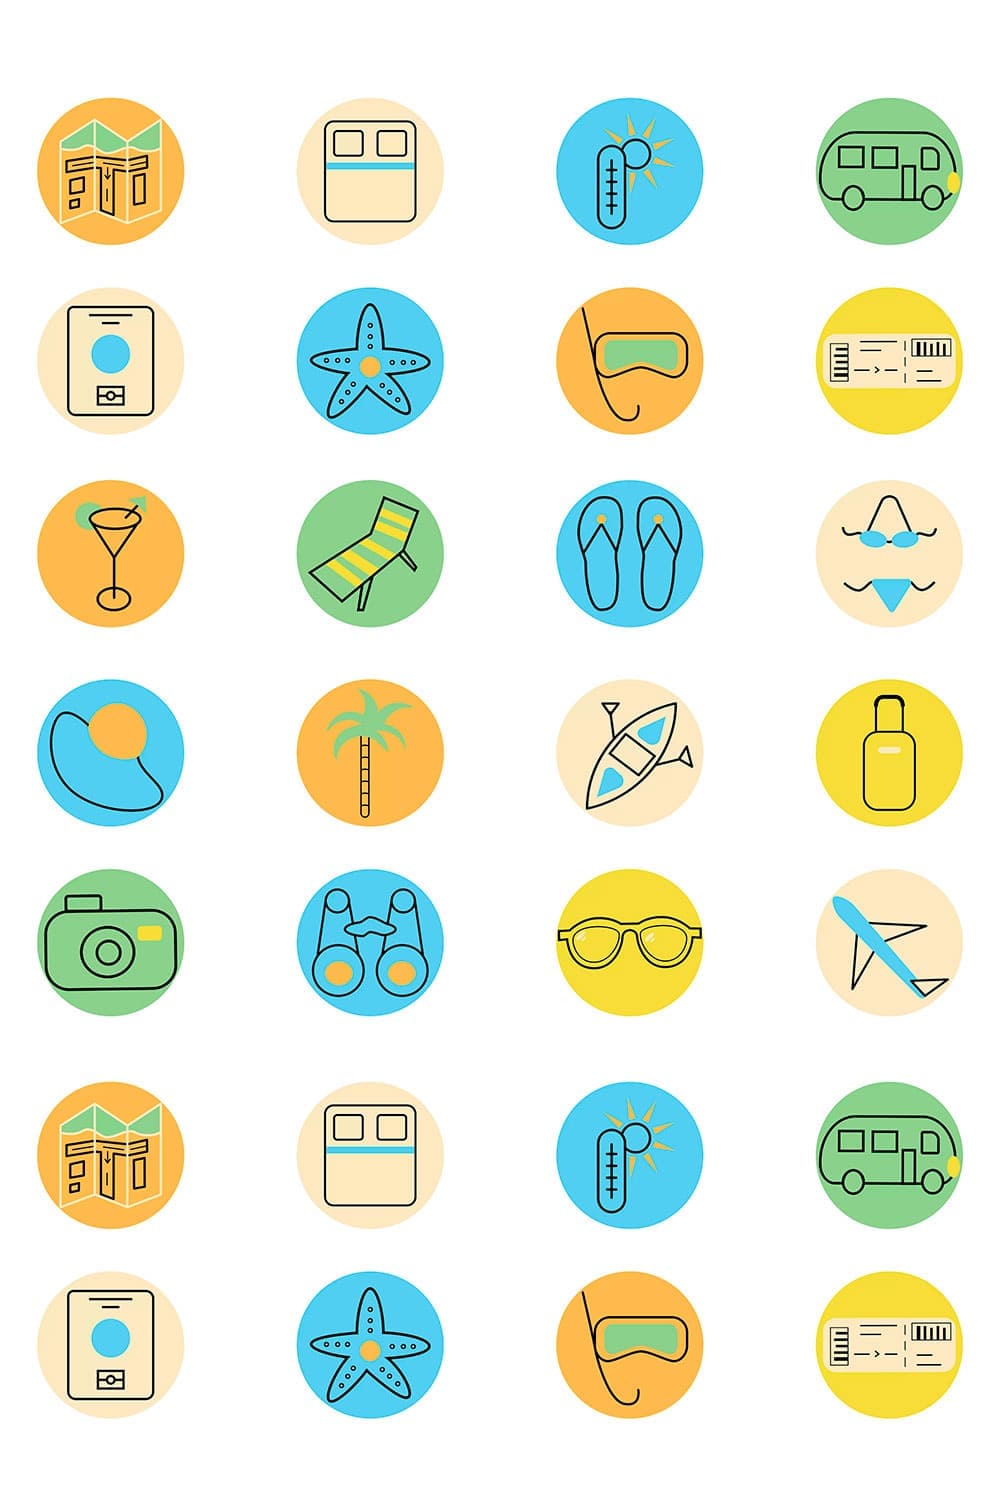 20 rounded vacation icons set, picture for pinterest.